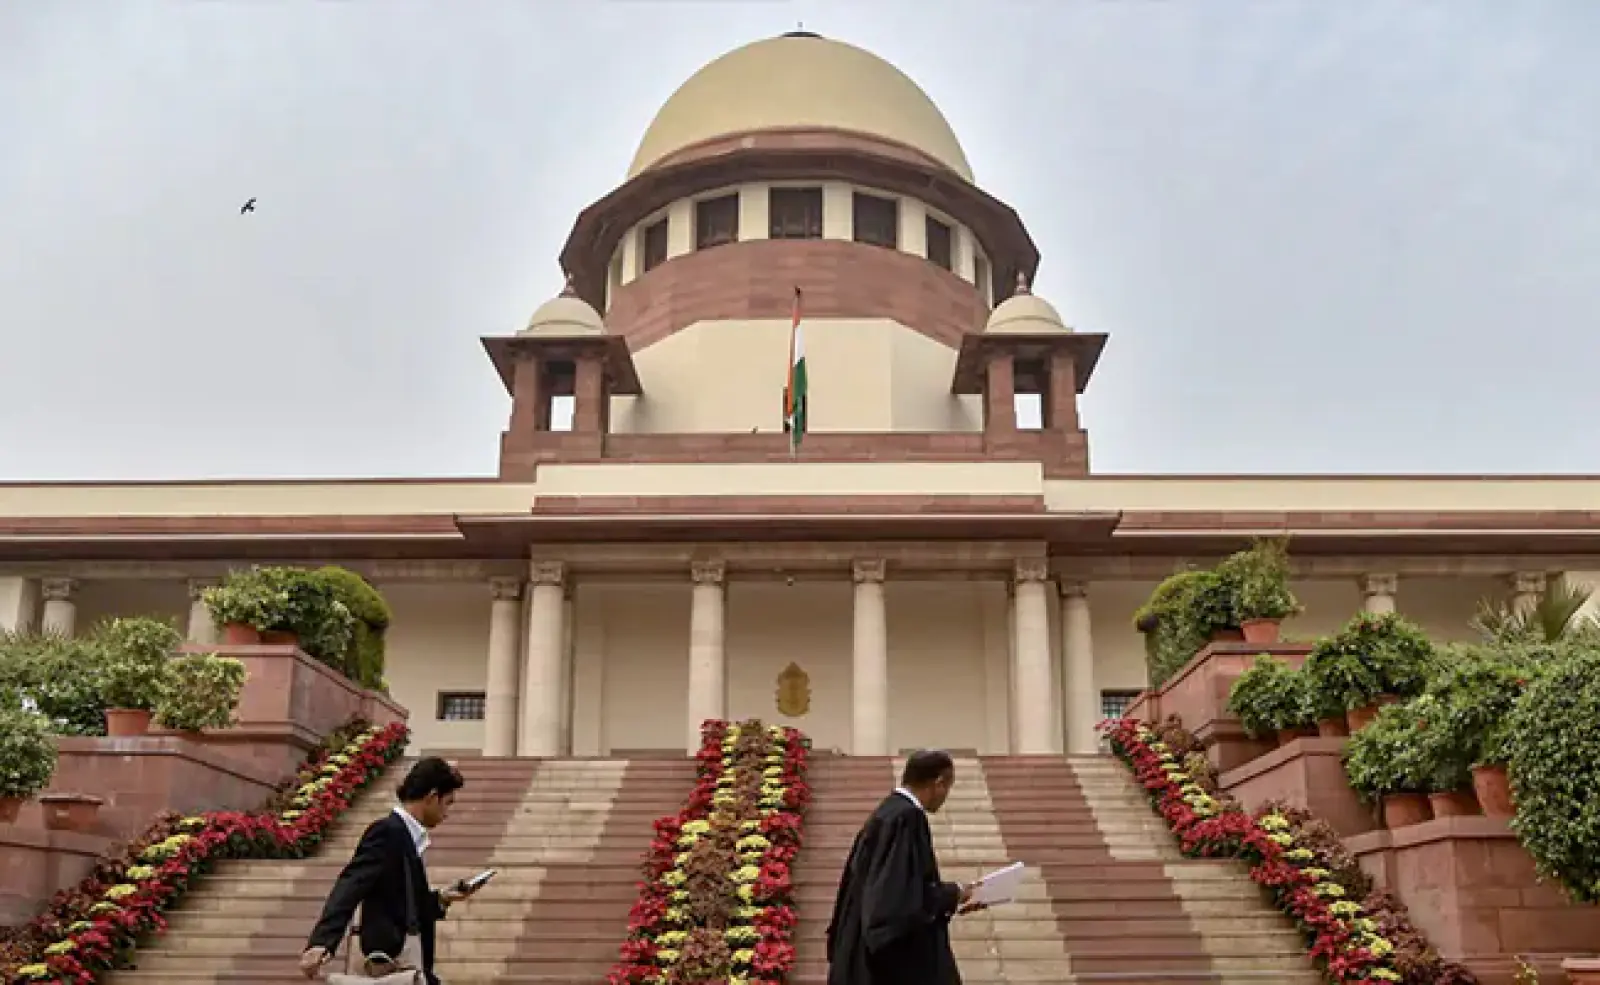 SC Bar Association writes letter to Chief Justice demanding installation of statue of country's first President and CJI in Supreme Court premises